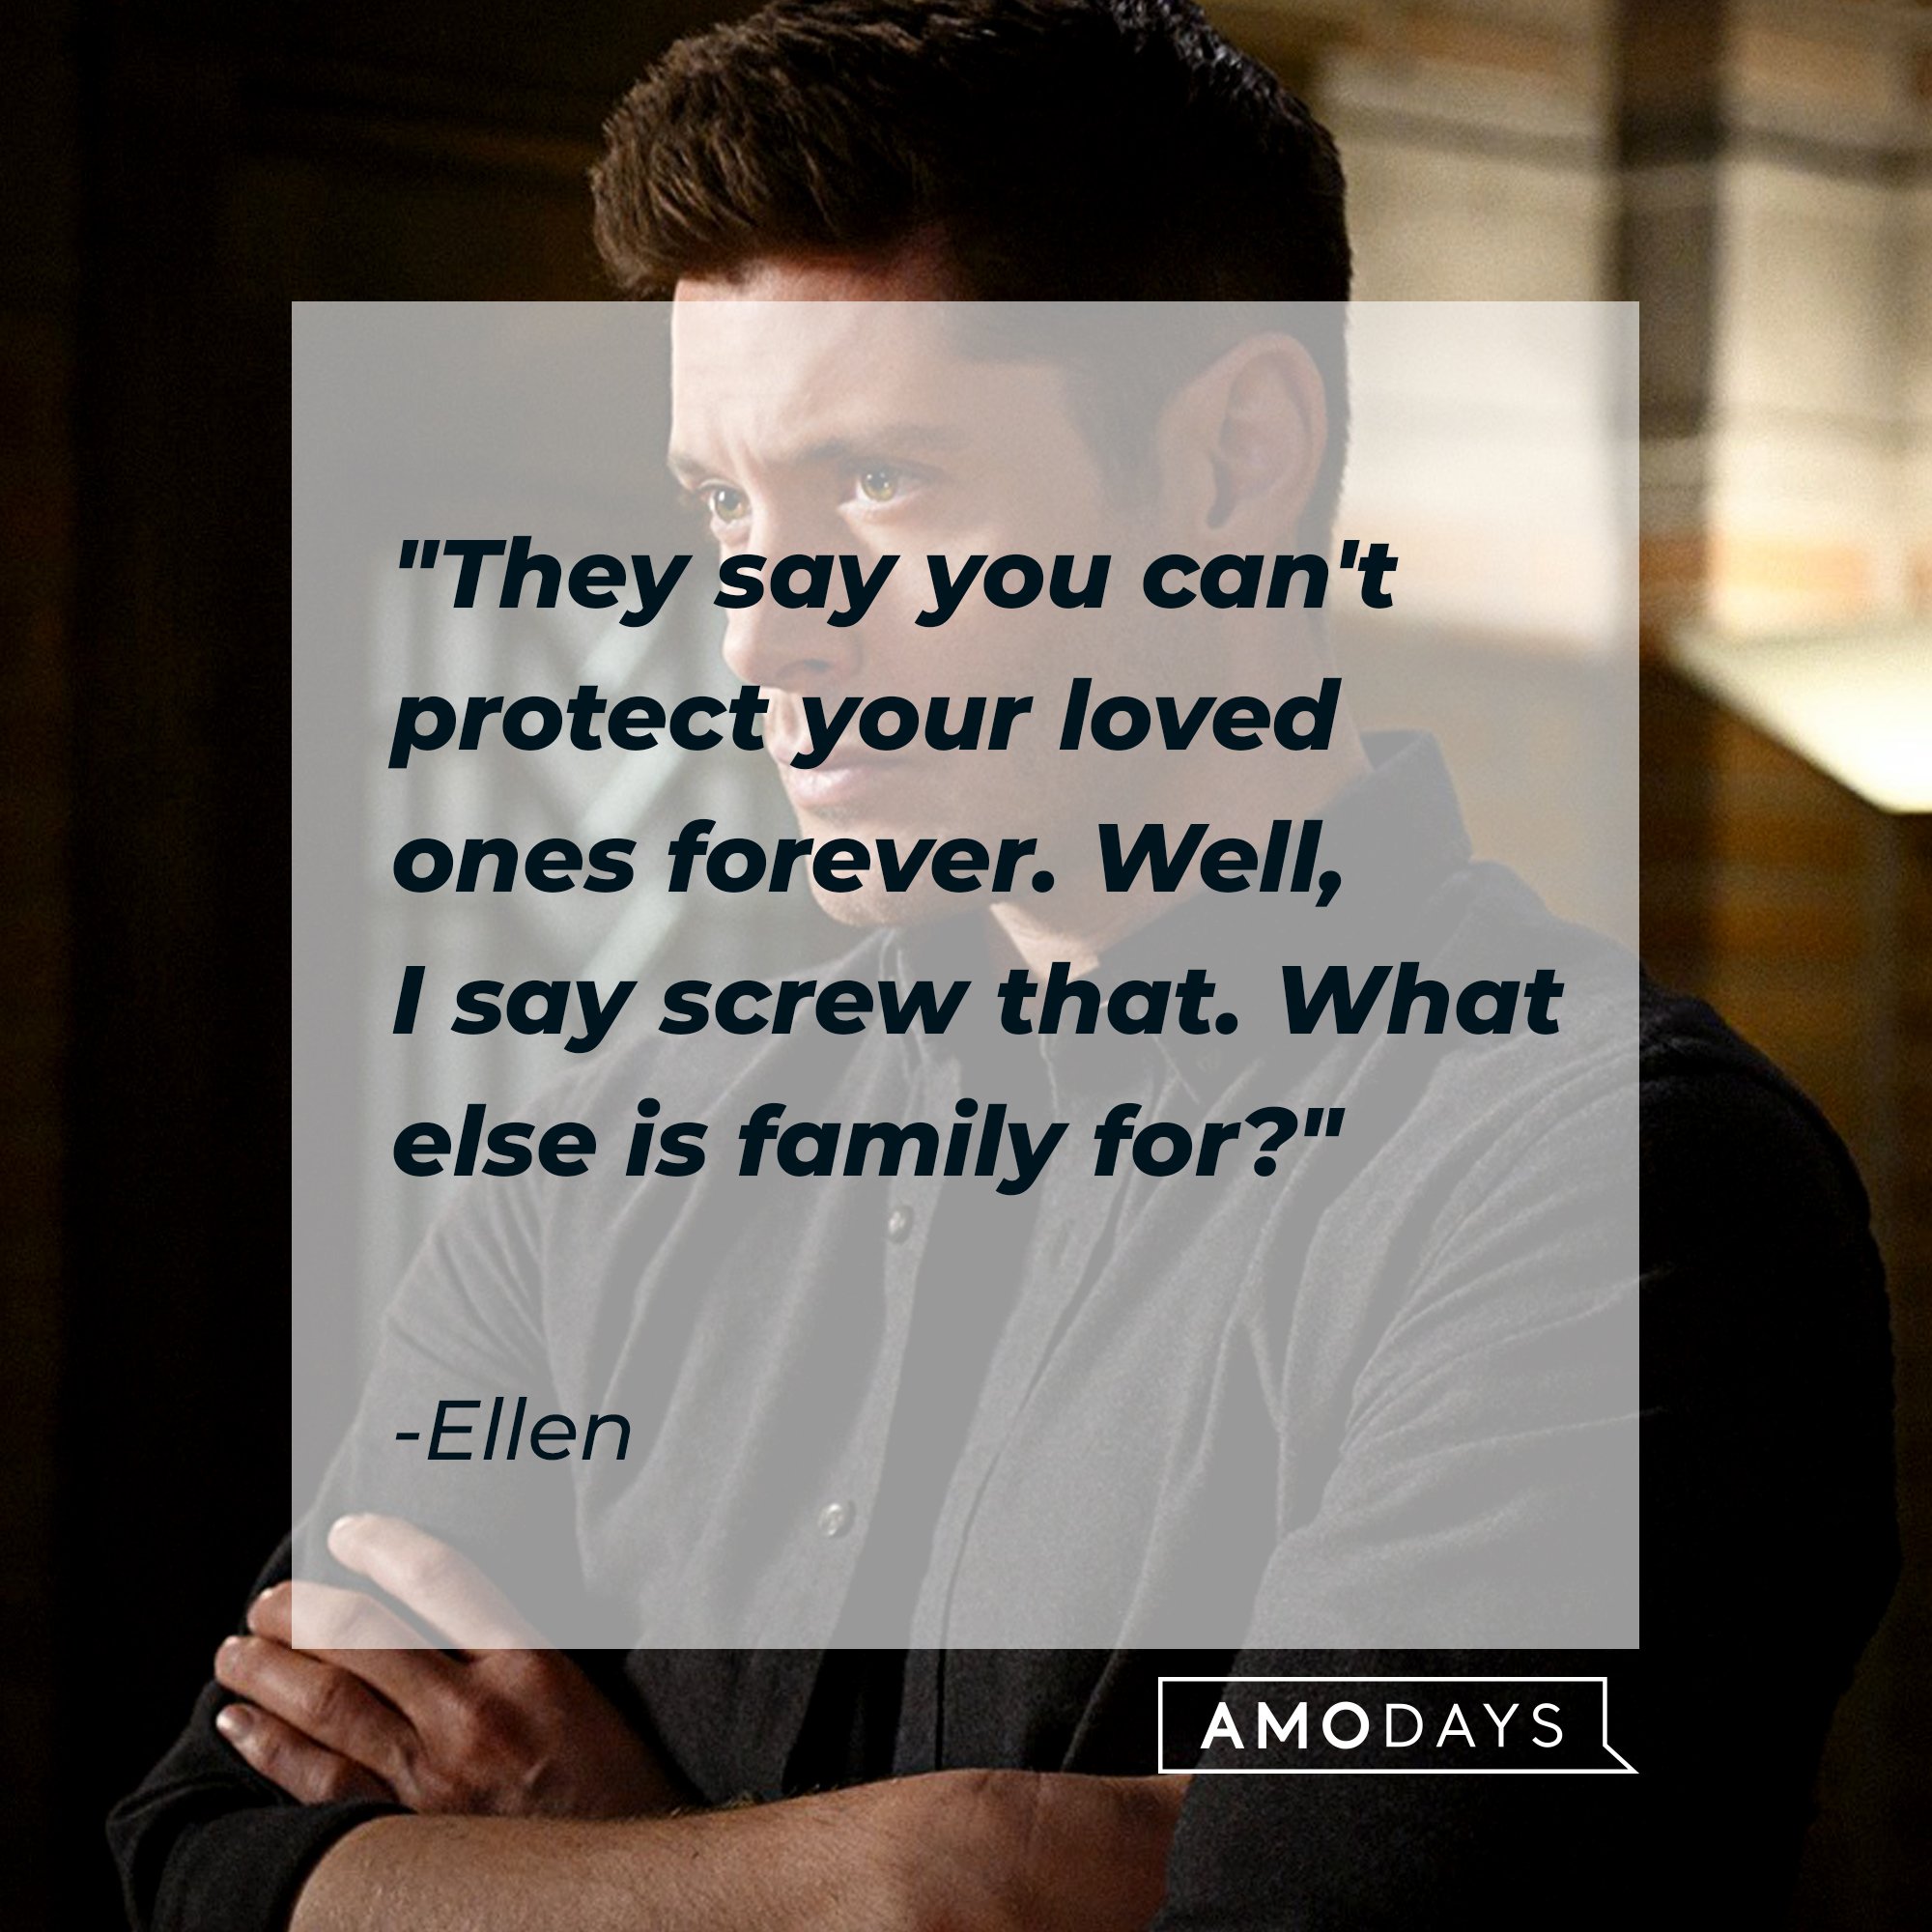 A photo of Dean Winchester with Ellen's quote, "They say you can't protect your loved ones forever. Well, I say screw that. What else is family for?" | Source: Facebbok/Supernatural